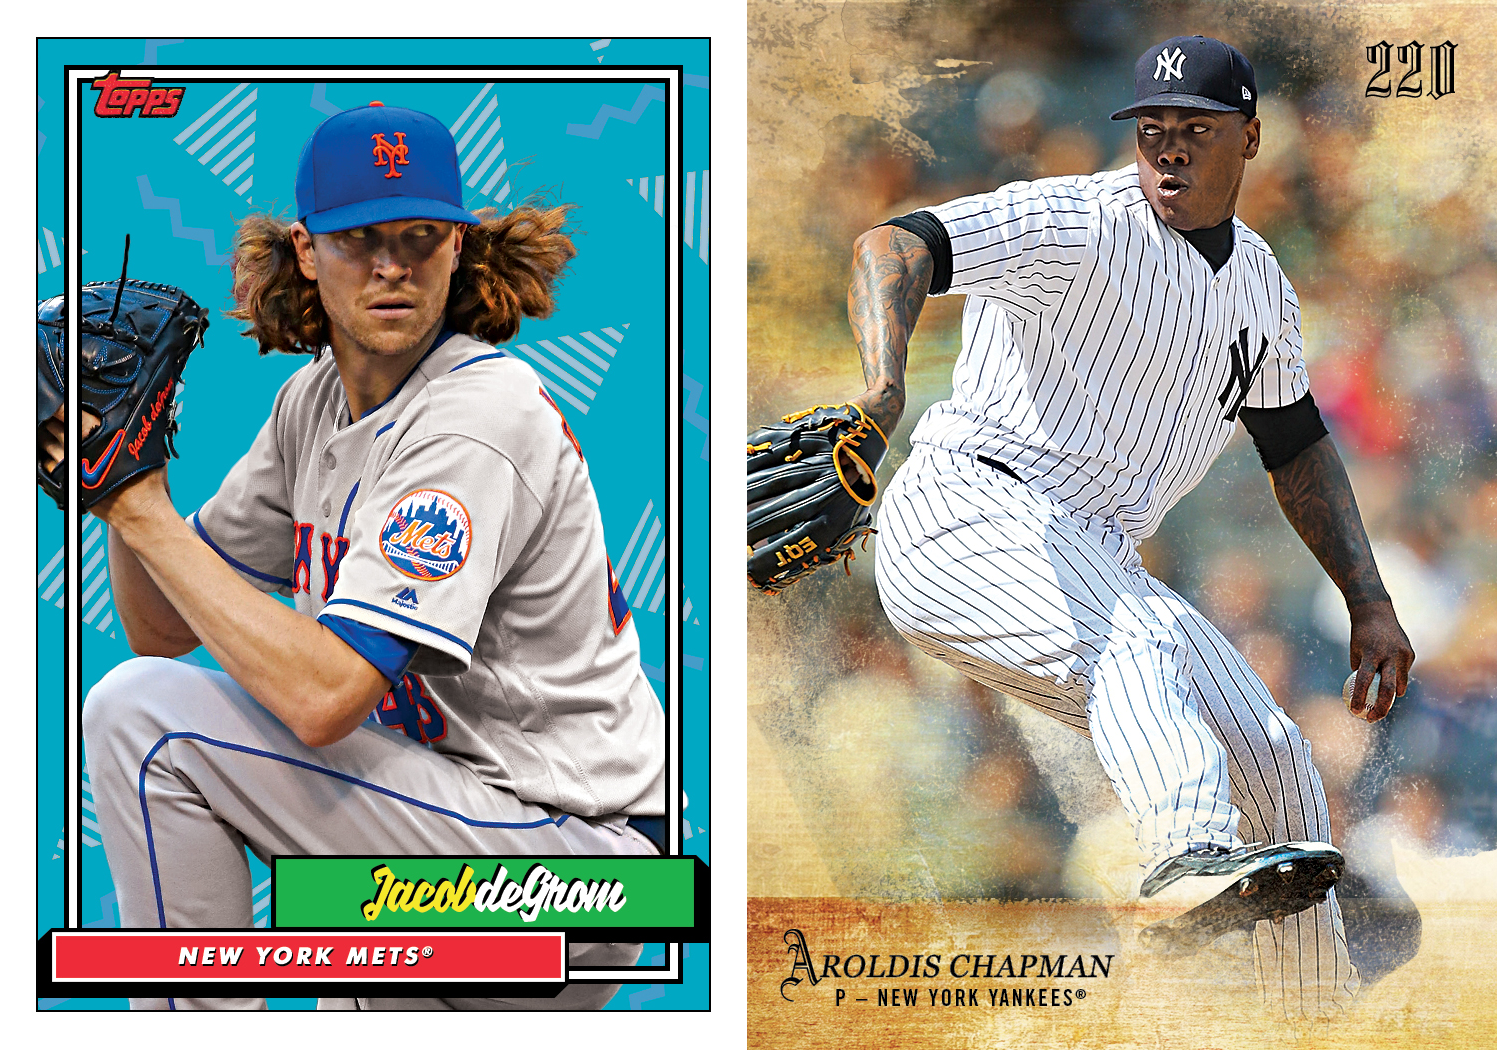 What Do Harper’s Topps Picks Say About His 2019 Destination?